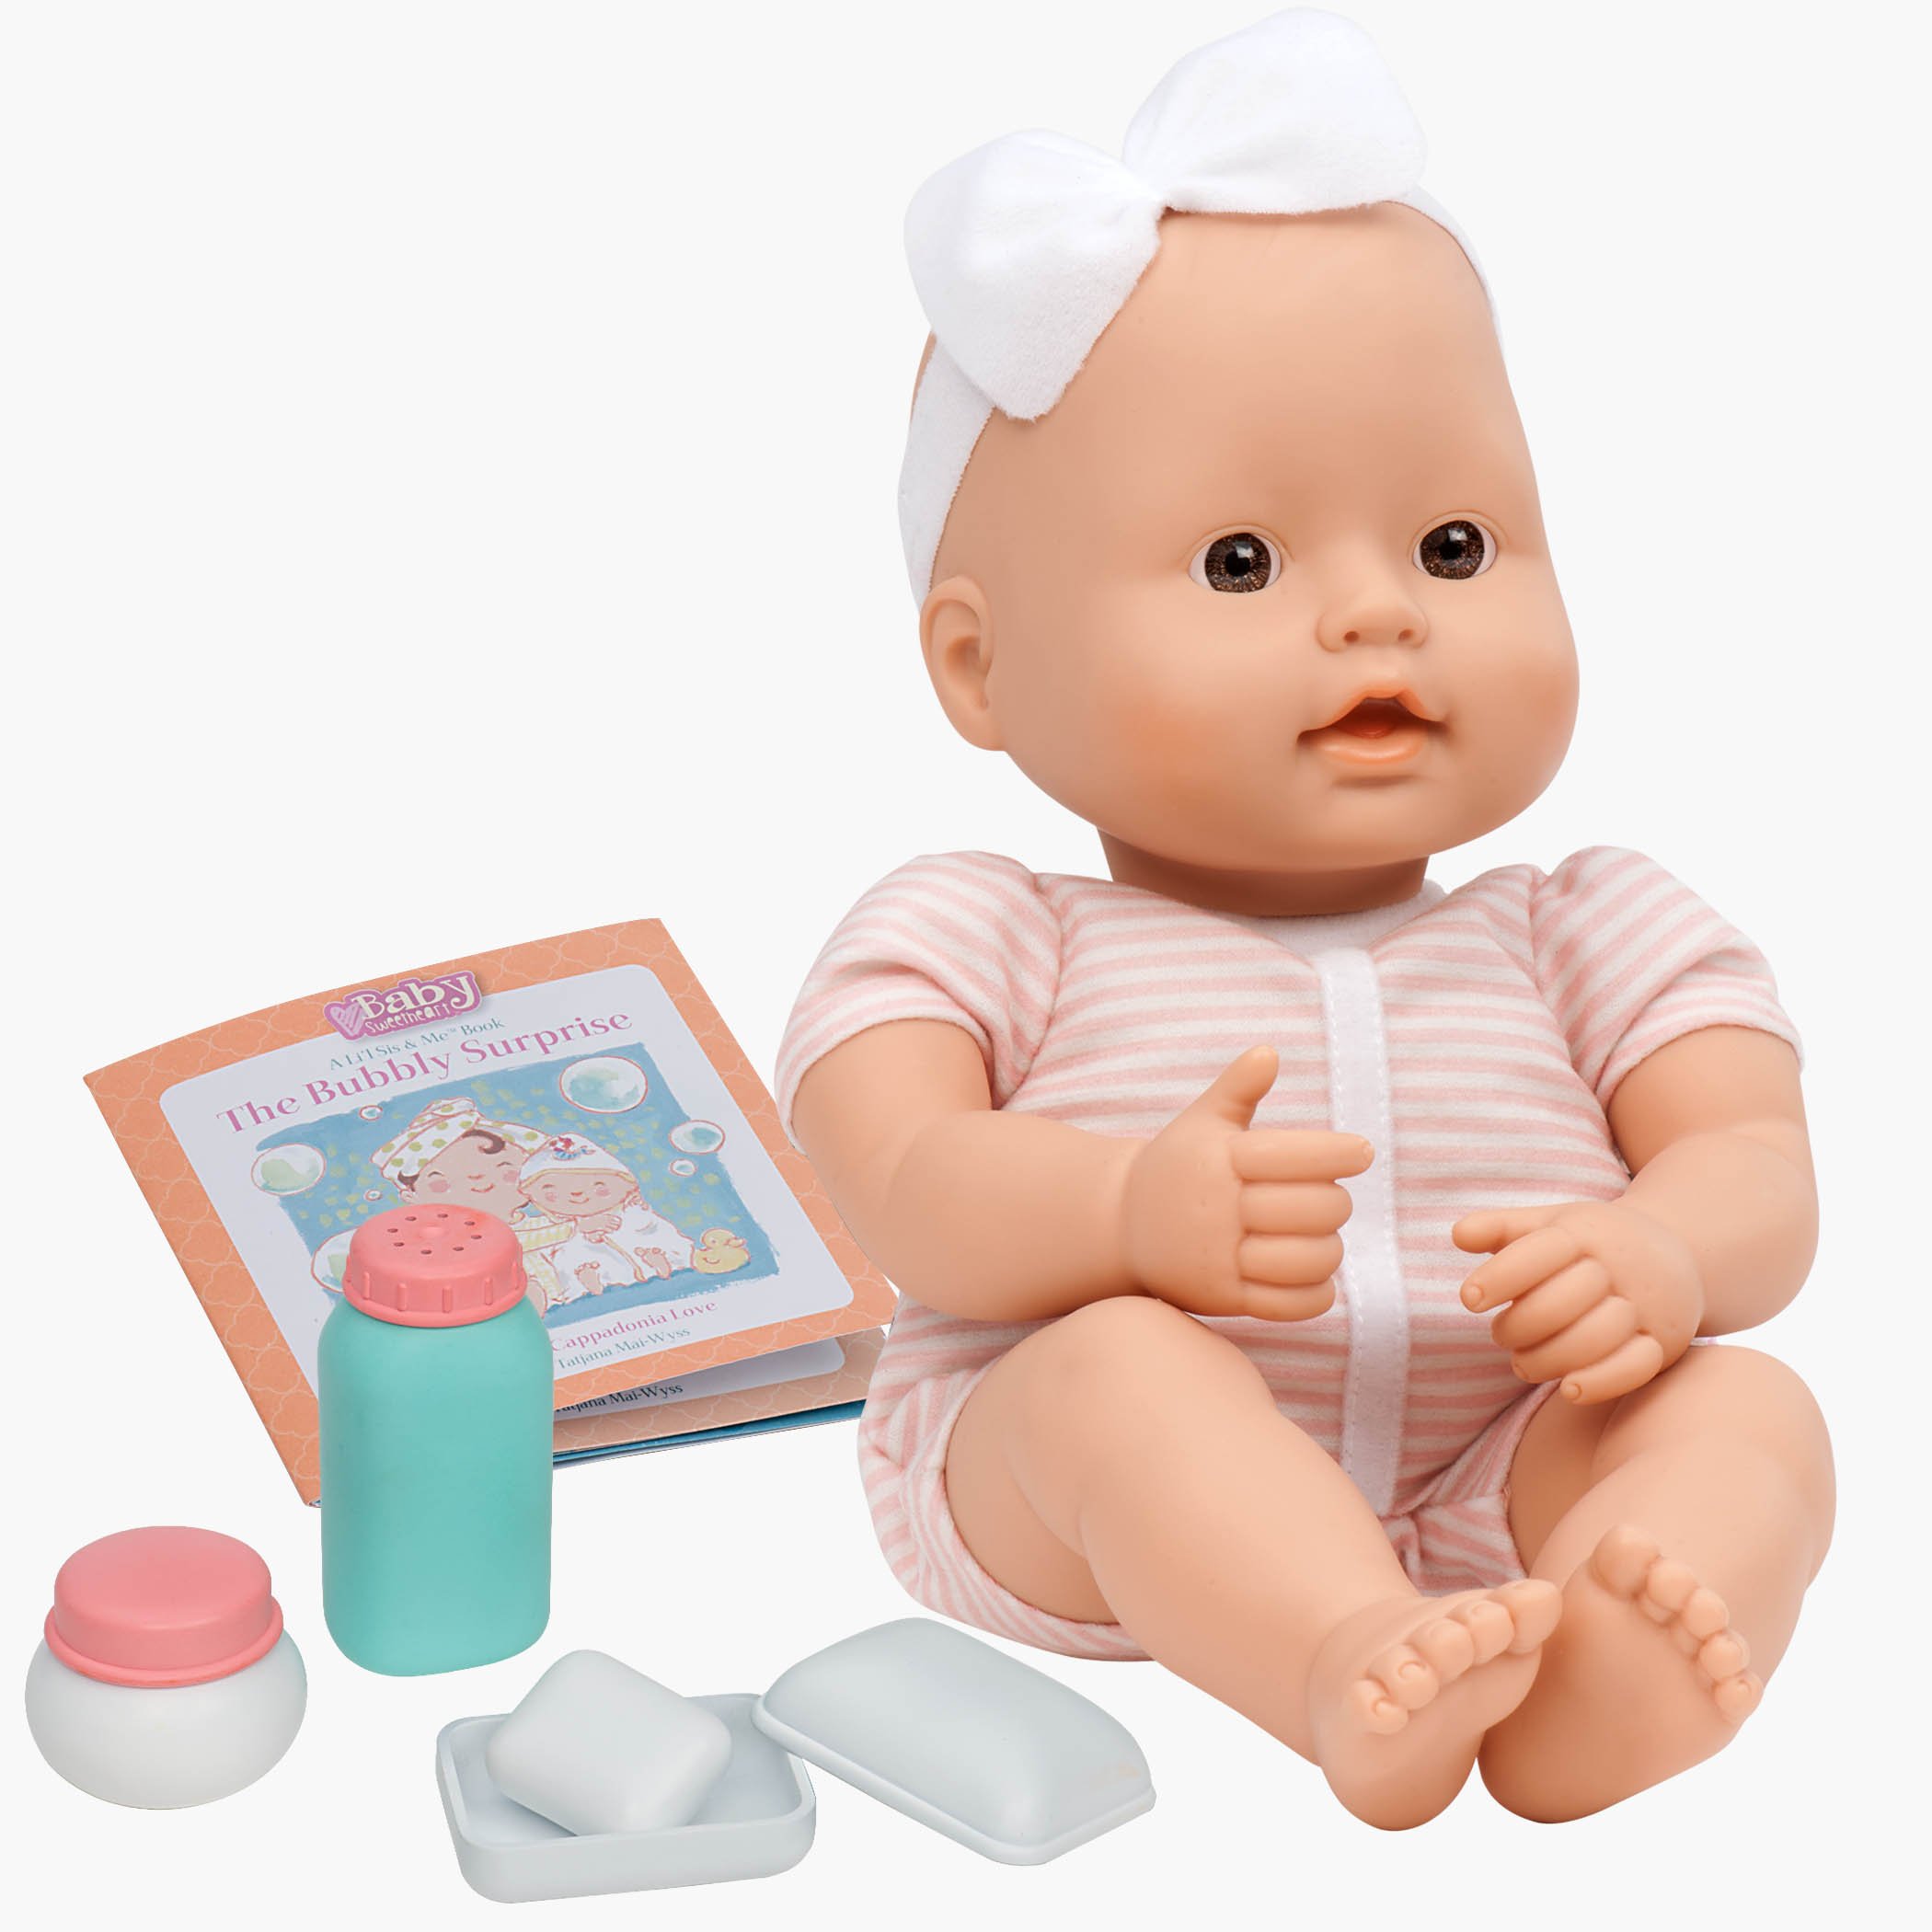 Baby Sweetheart by Battat – Bath Time 12-inch Soft-Body Newborn Baby Doll with Easy-to-Read Story Book and Baby Doll Accessories